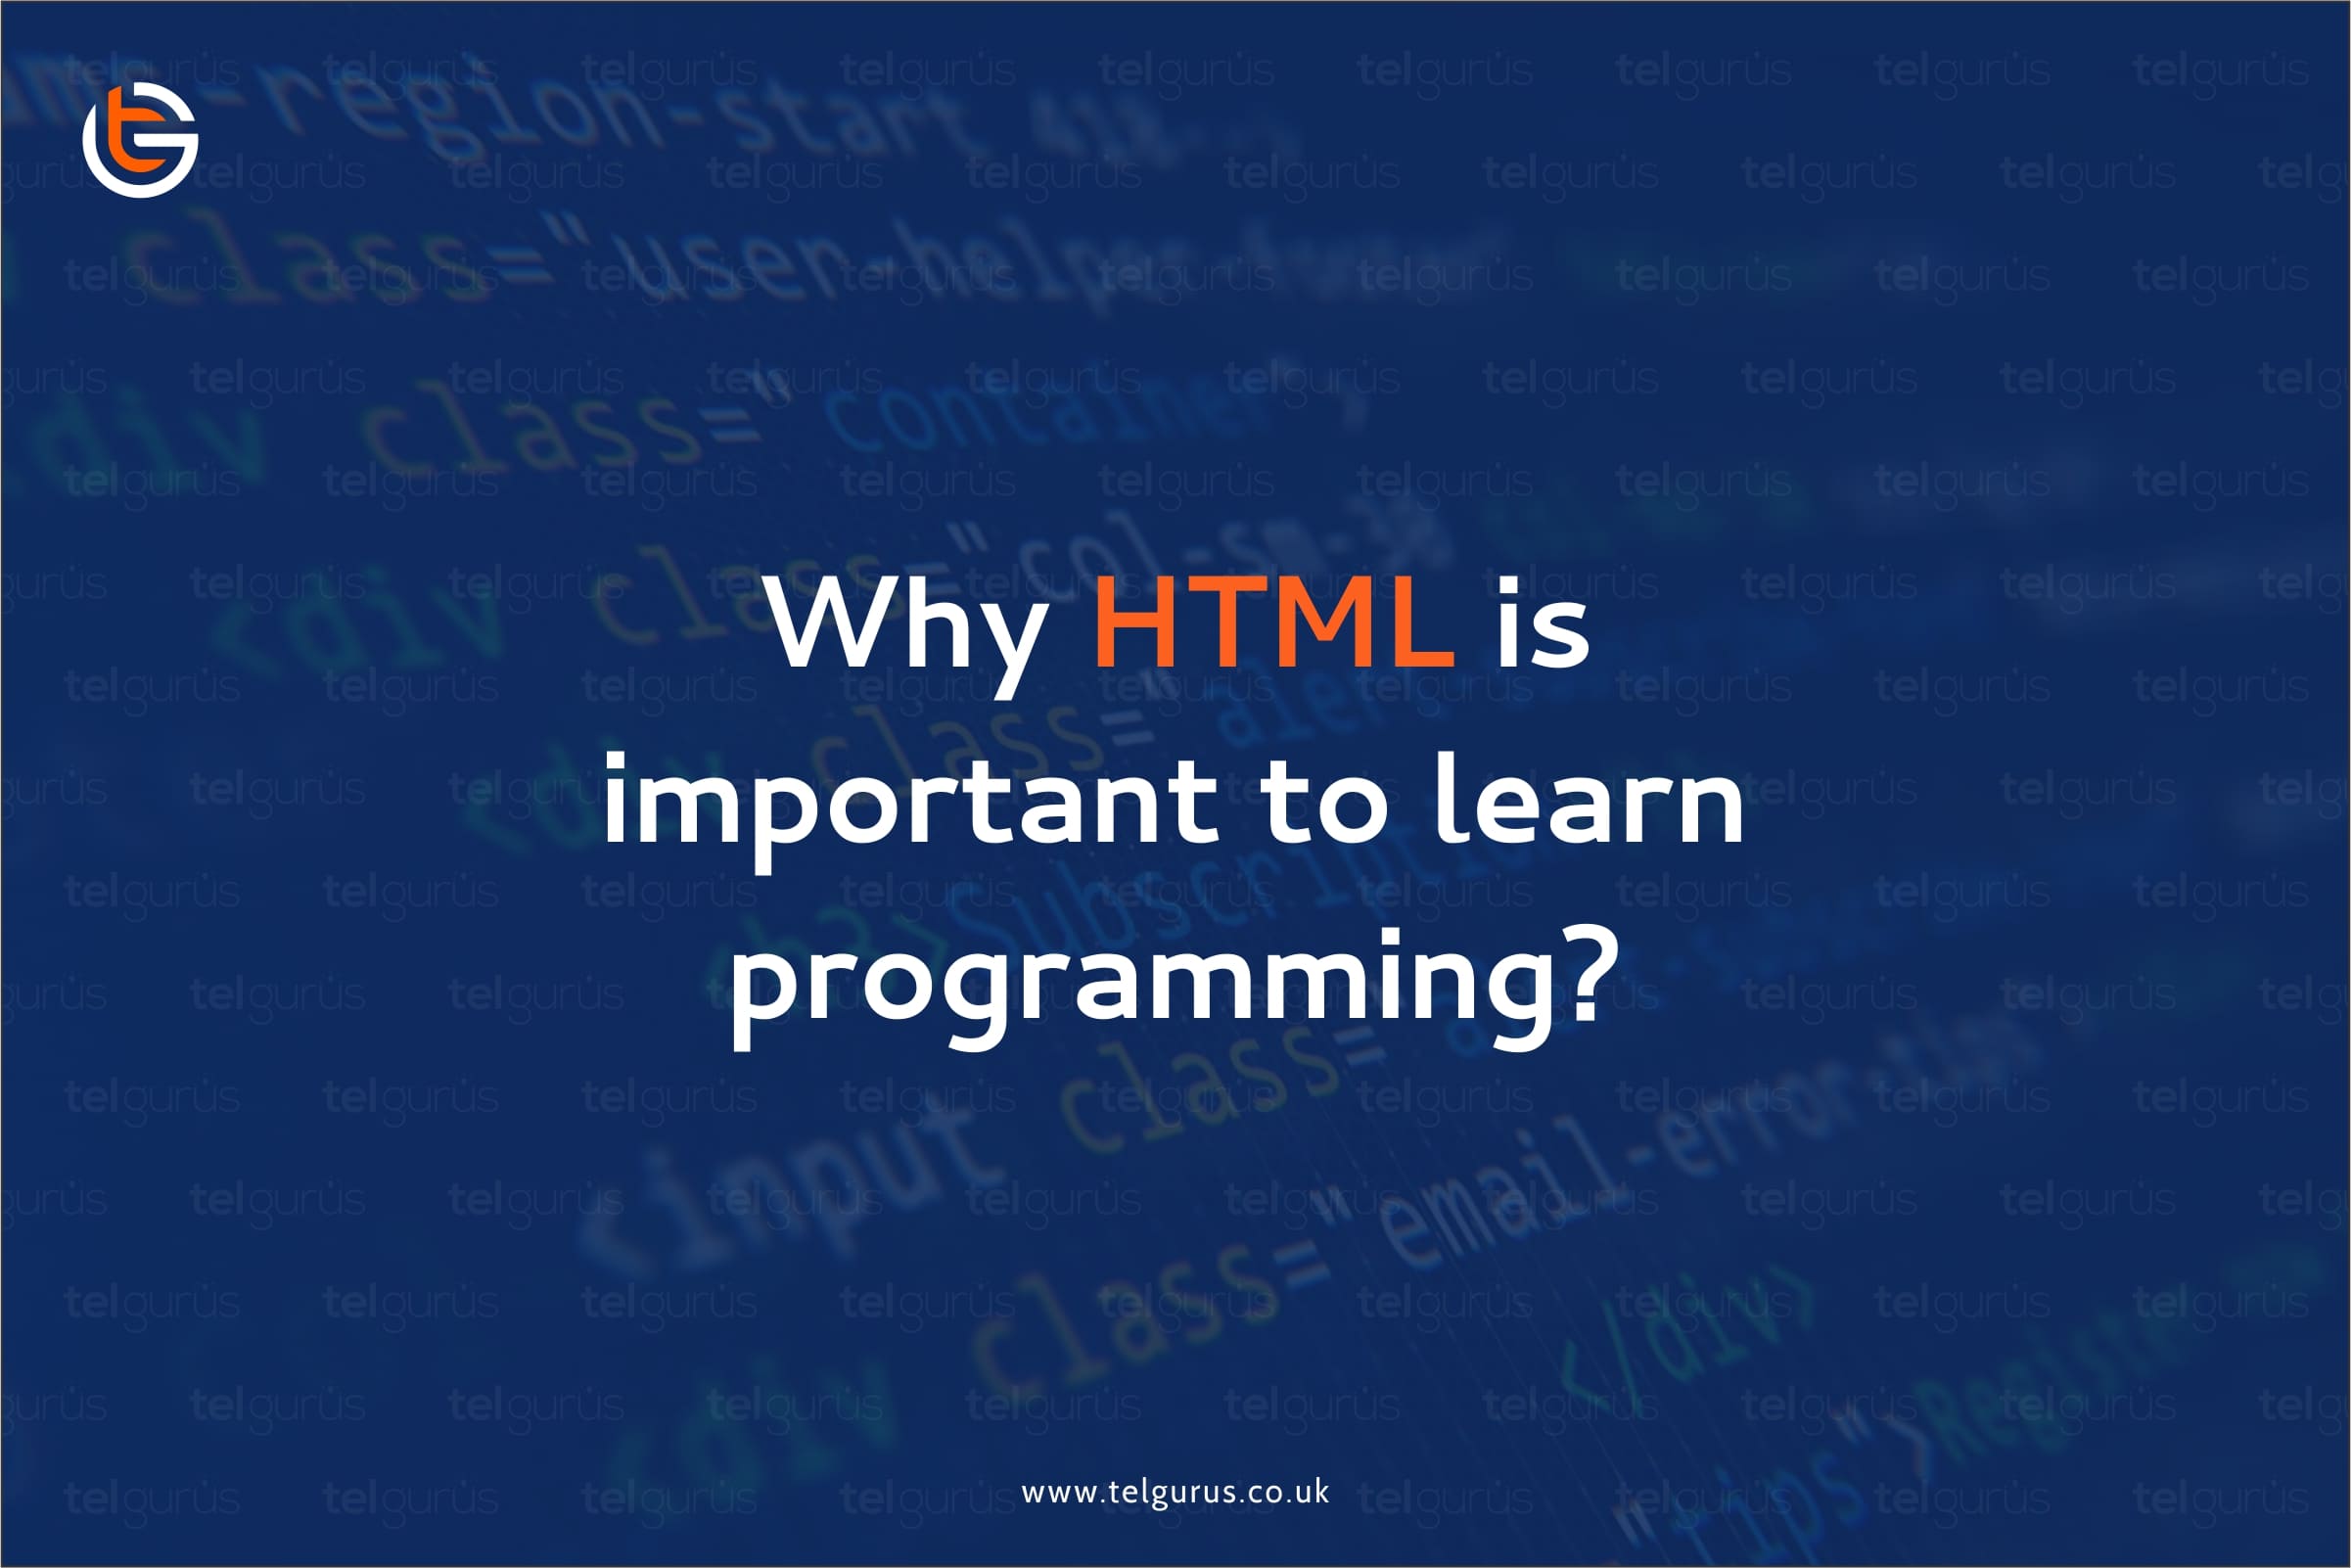 Why HTML is important to learn programming?